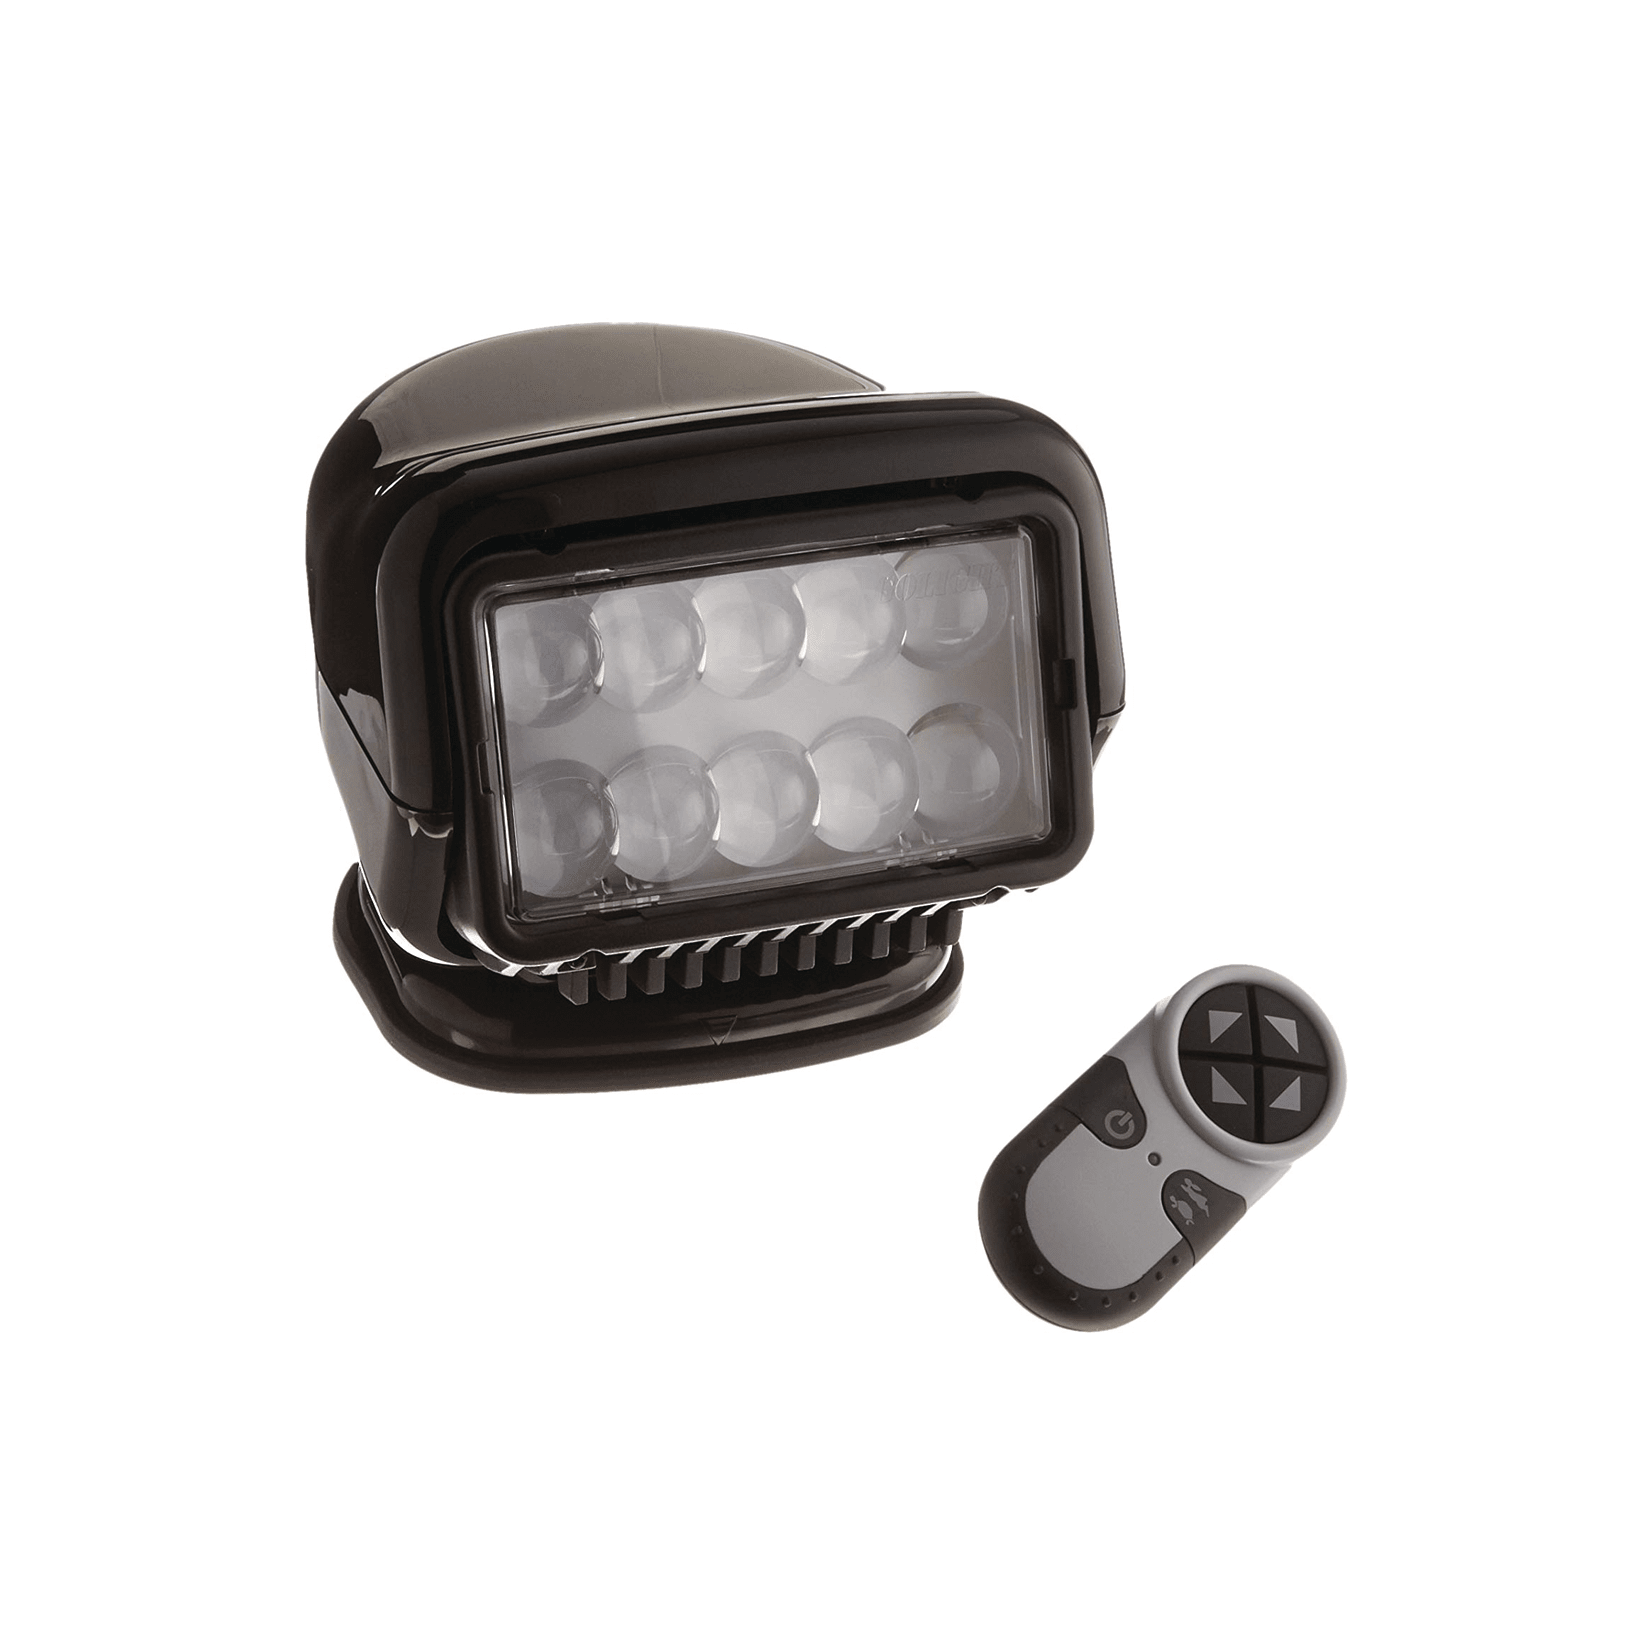 https://image.fisheriessupply.com/c_lpad,dpr_3.0,w_550,h_550,d_imageComingSoon-tiff/f_auto,q_auto/v1/static-images/golight-7in-led-stryker-searchlight-wireless-handheld-remote-controller-main